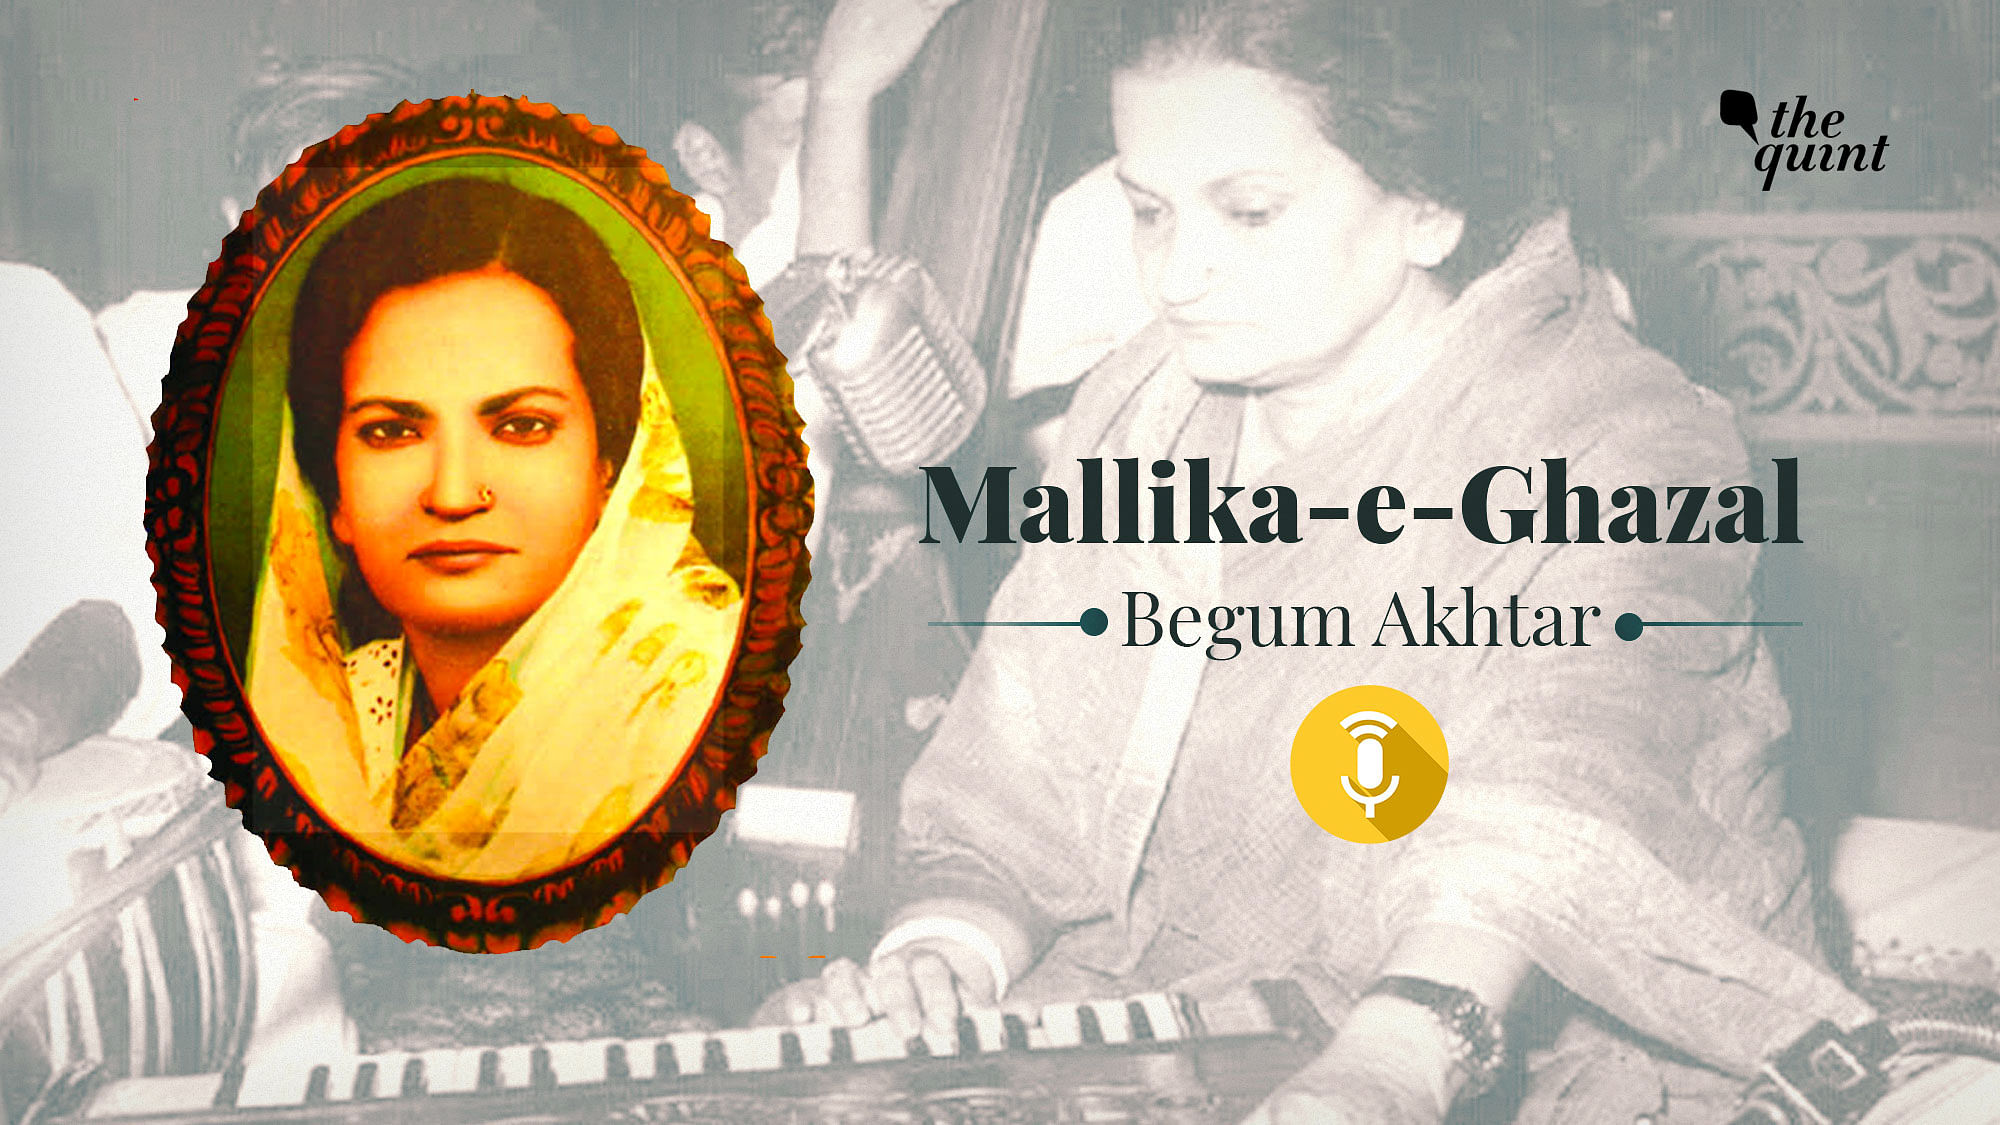 Listen to this special podcast on Begum Akhtar’s journey from a courtesan to Mallika-e-Ghazal.